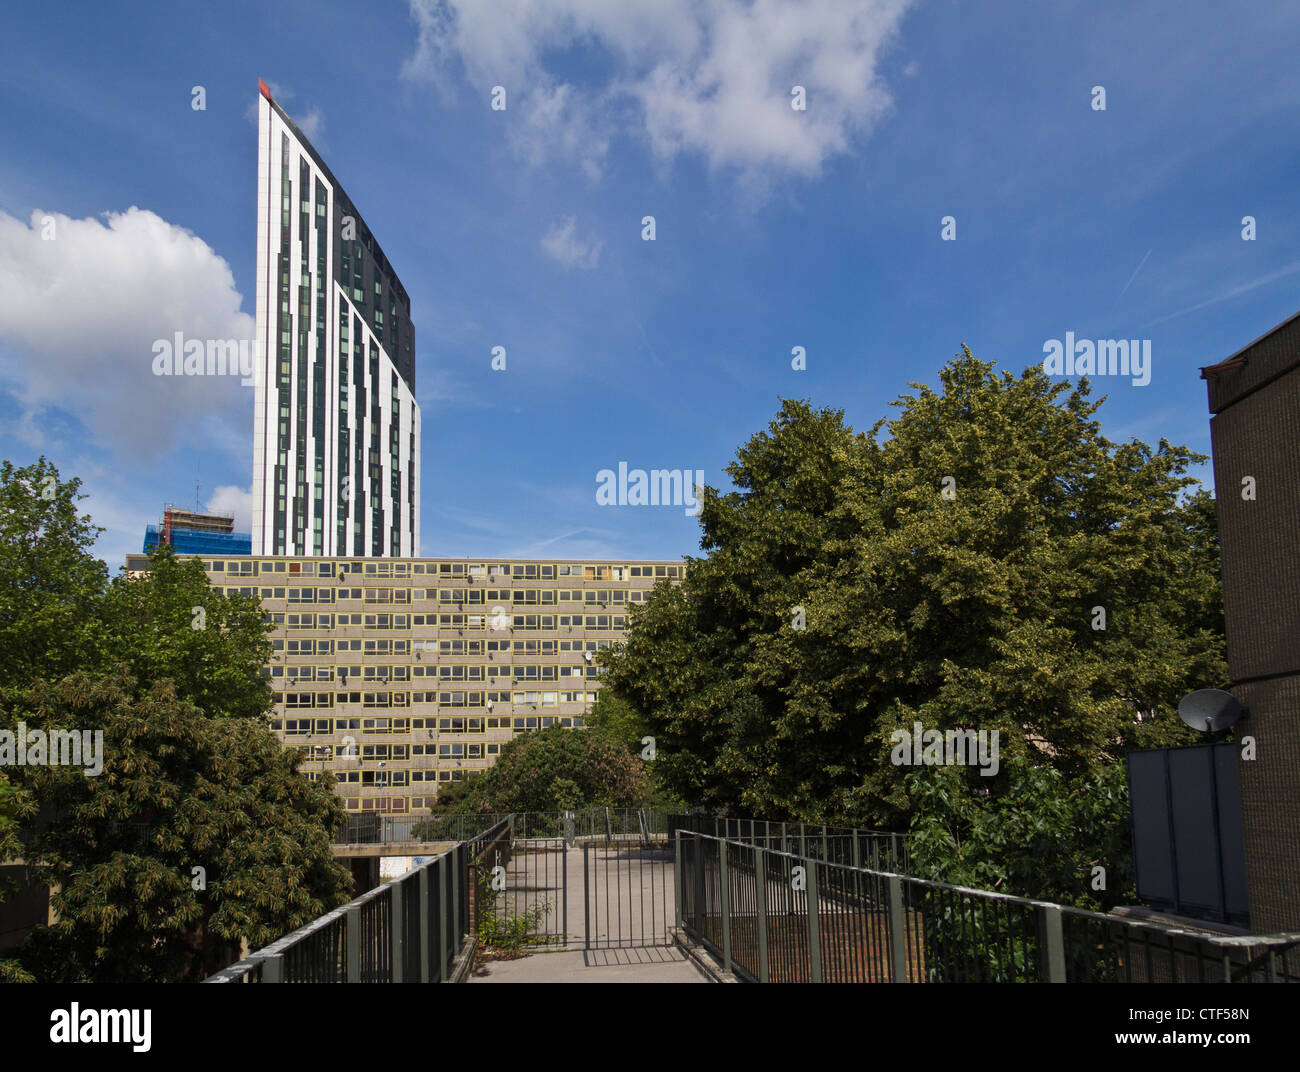 view of Heygate estate, council housed marked for demolition as plans to redevelop the area of Elephant and Castle South London Stock Photo